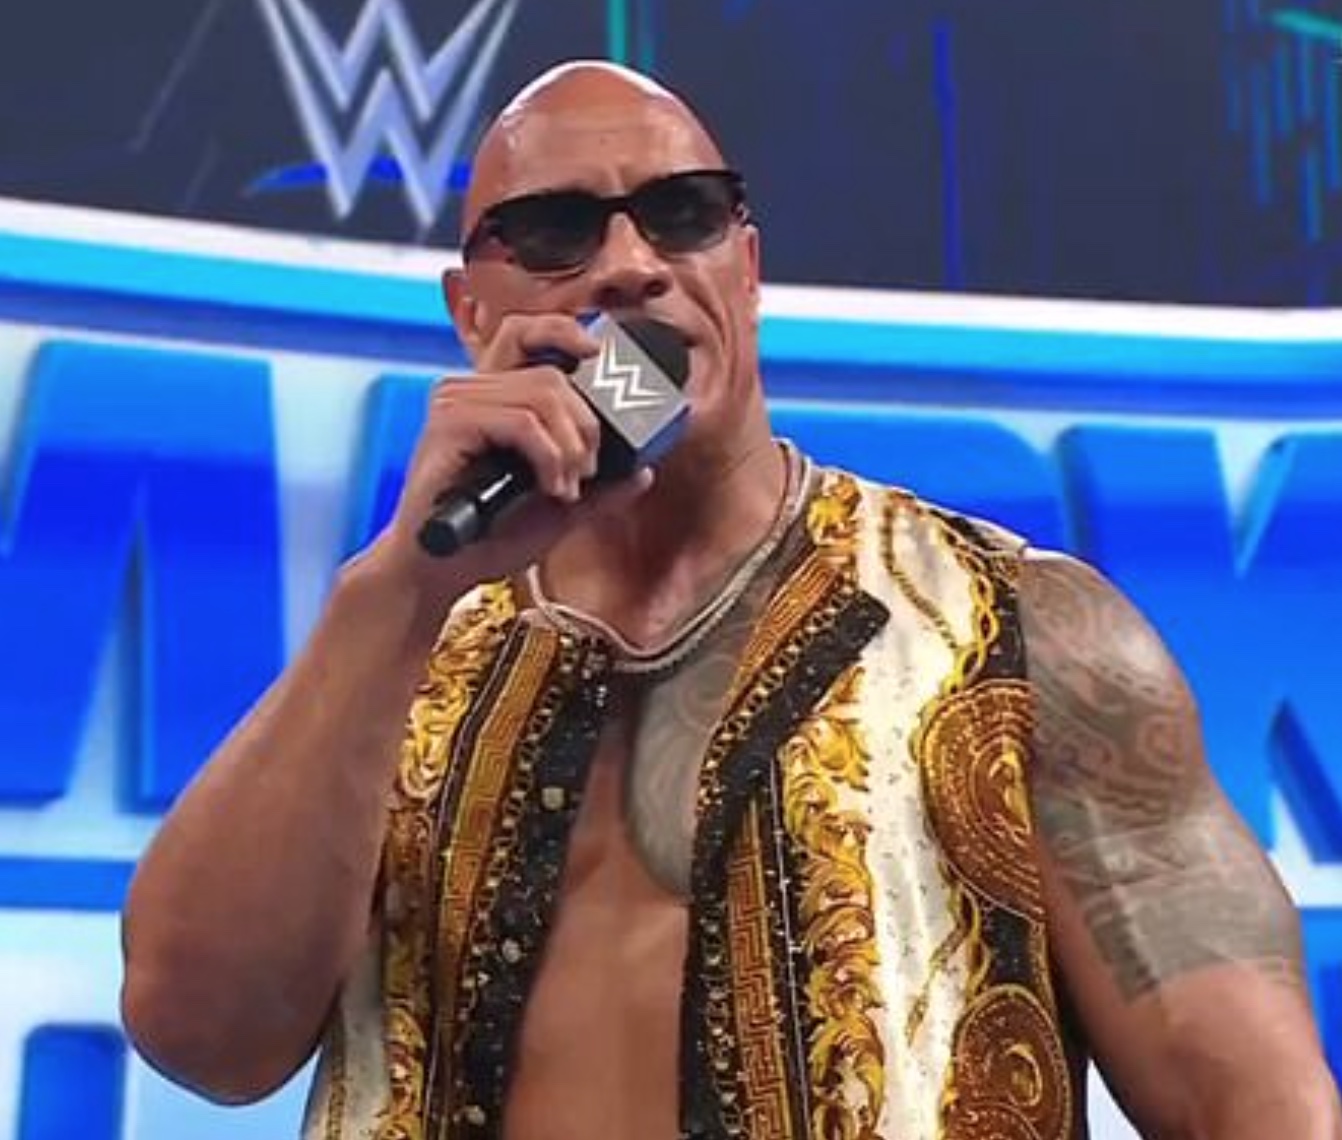 Fans Buzzing Over The Rock’s Bold Versace Look on SmackDown